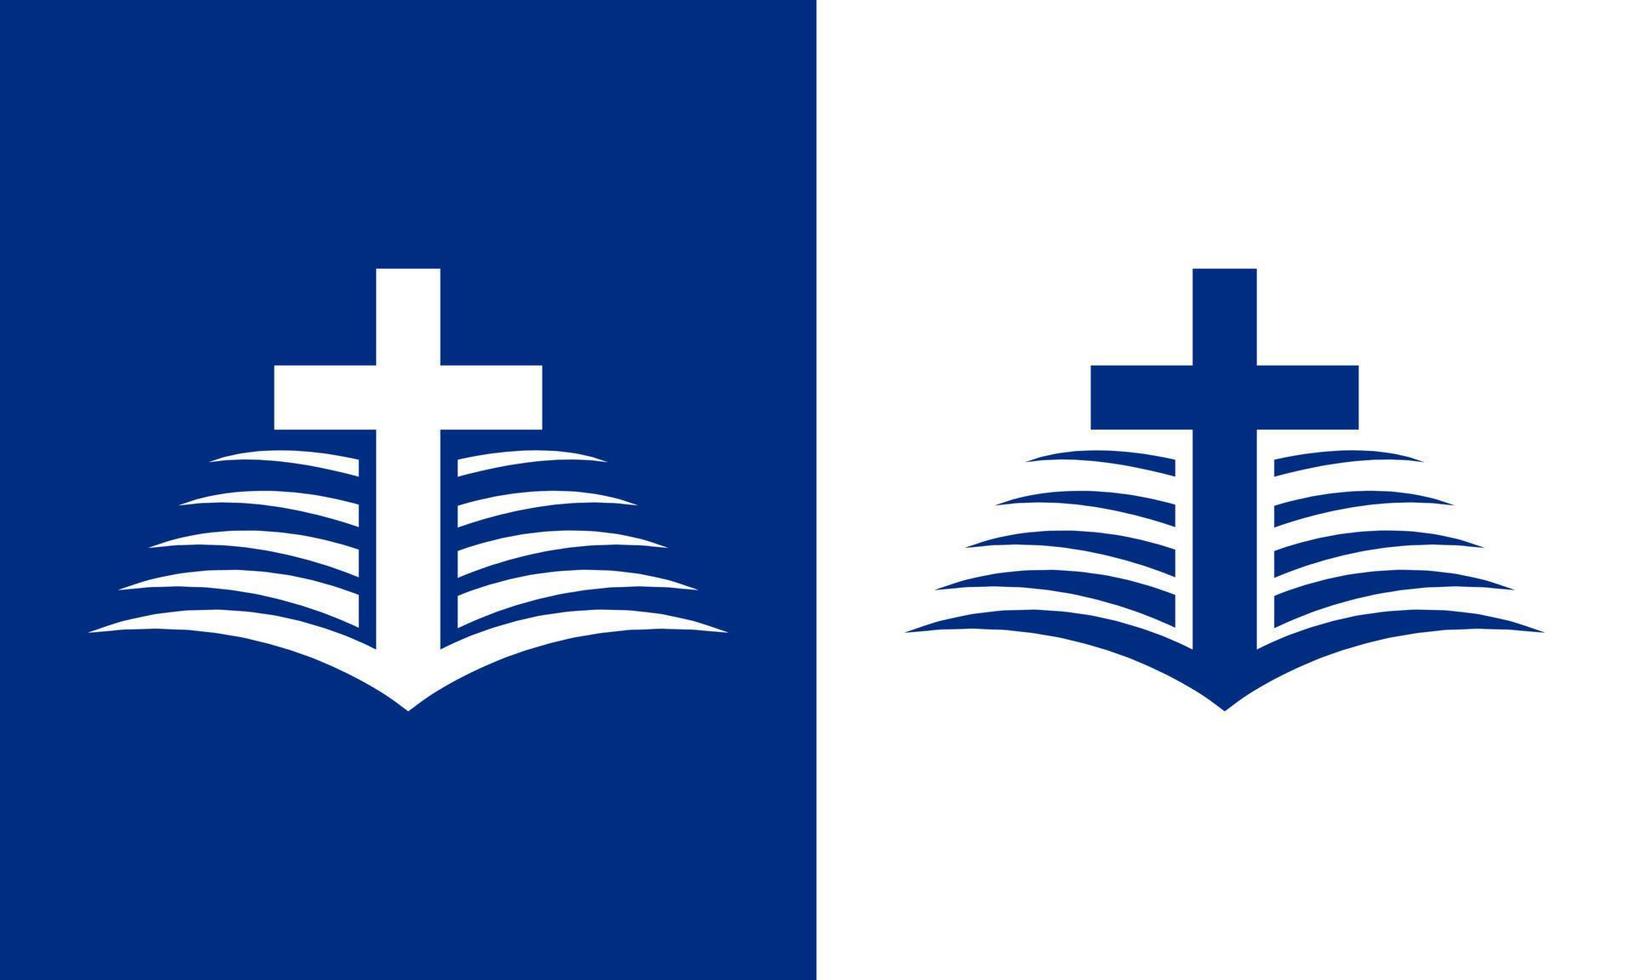 Bible and cross logo in shades of blue. It is suitable for logos of churches, organizations, movements, communities, and others. vector